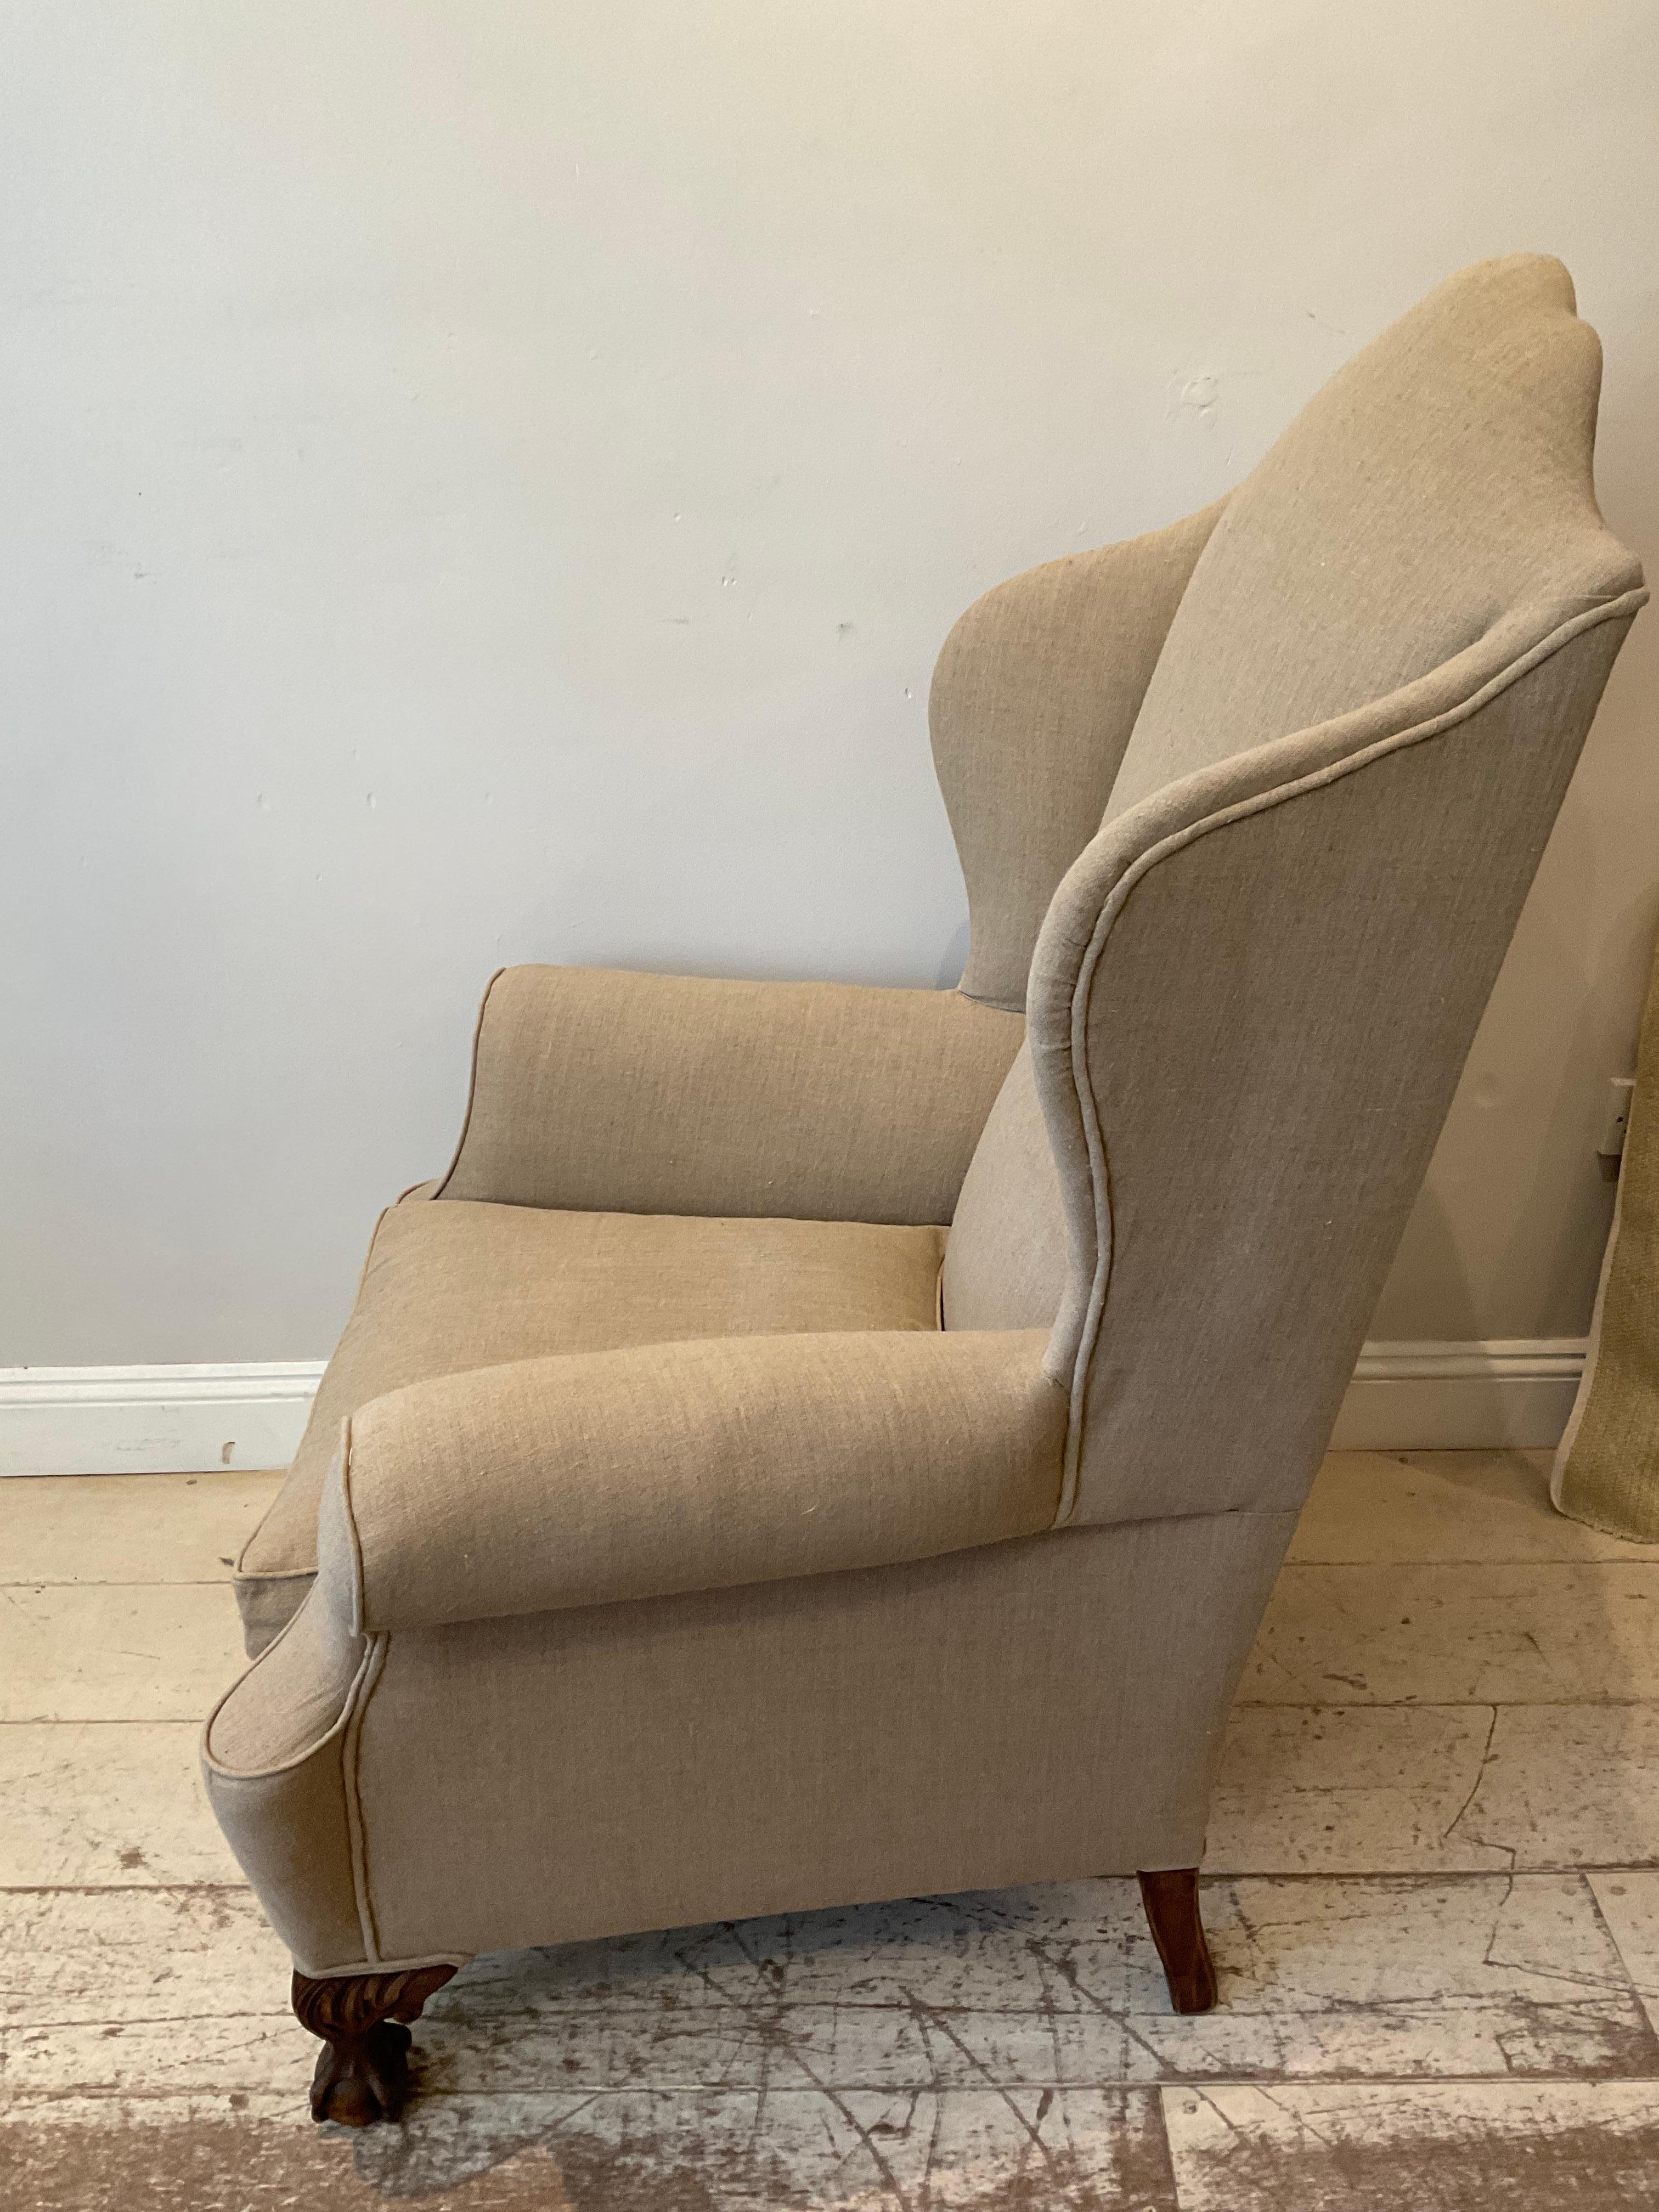 Oak Pair of Large 1920s English Wing Back Chairs Upholstered in Neutral Linen